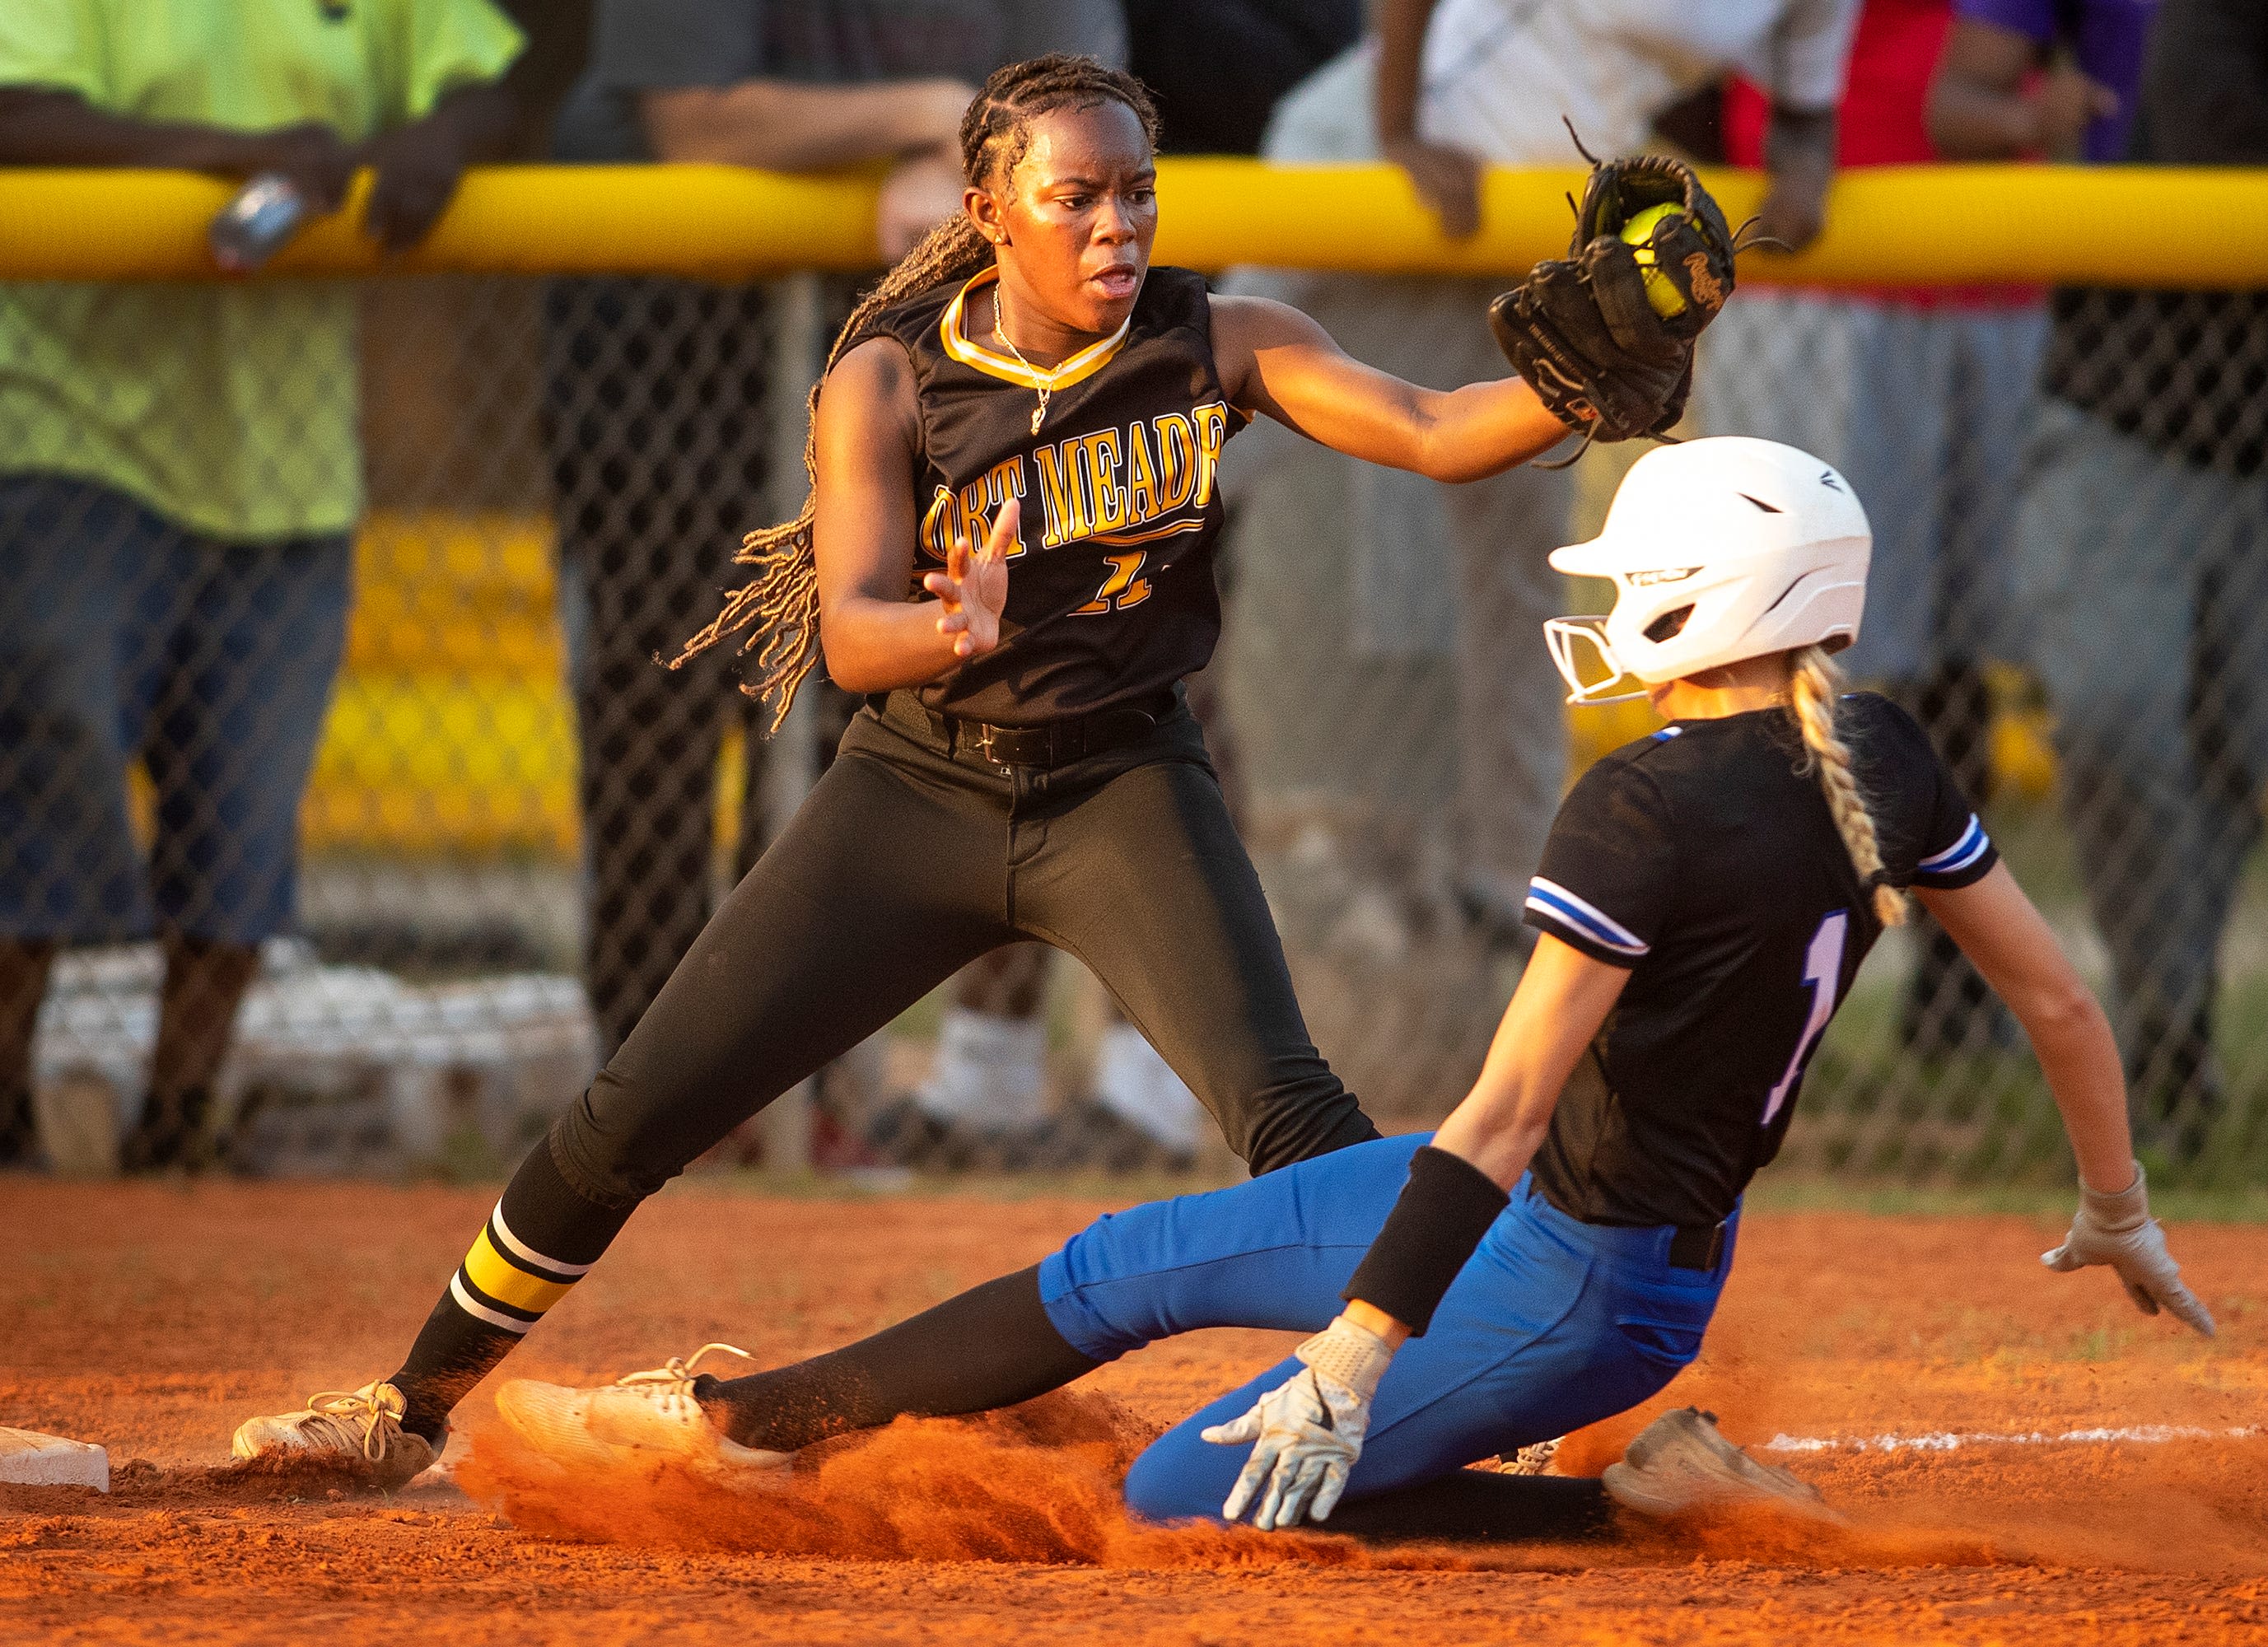 Softball: Fort Meade ousts Lakeland Christian; Lake Wales wins in 1st round of playoffs